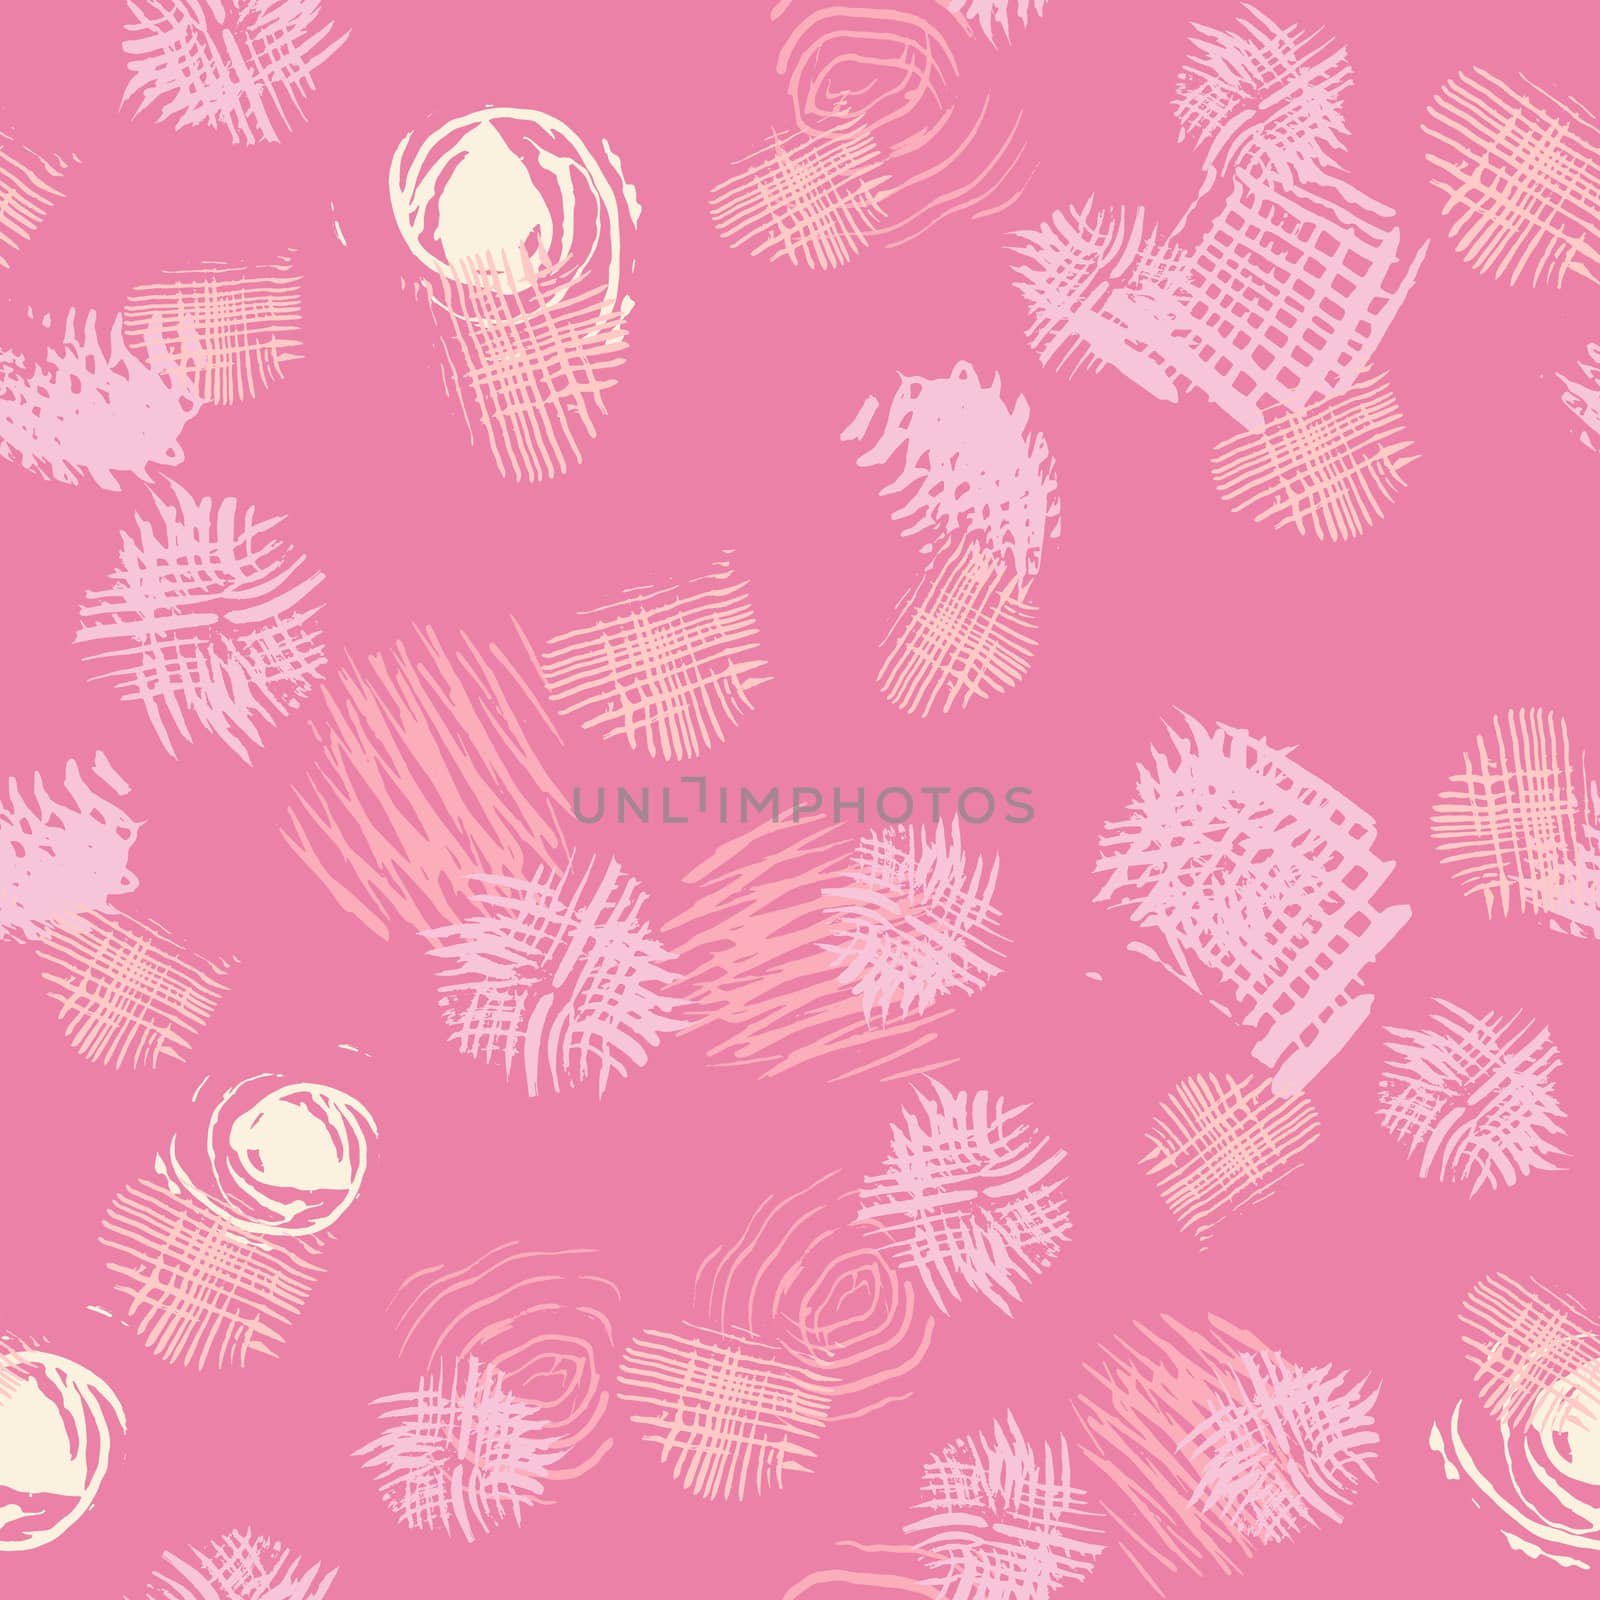 Pink abstract shapes seamless pattern with hand drawn texture pastel color background. Design for wrapping paper, wallpaper, fabric print, backdrop. Vector illustration.